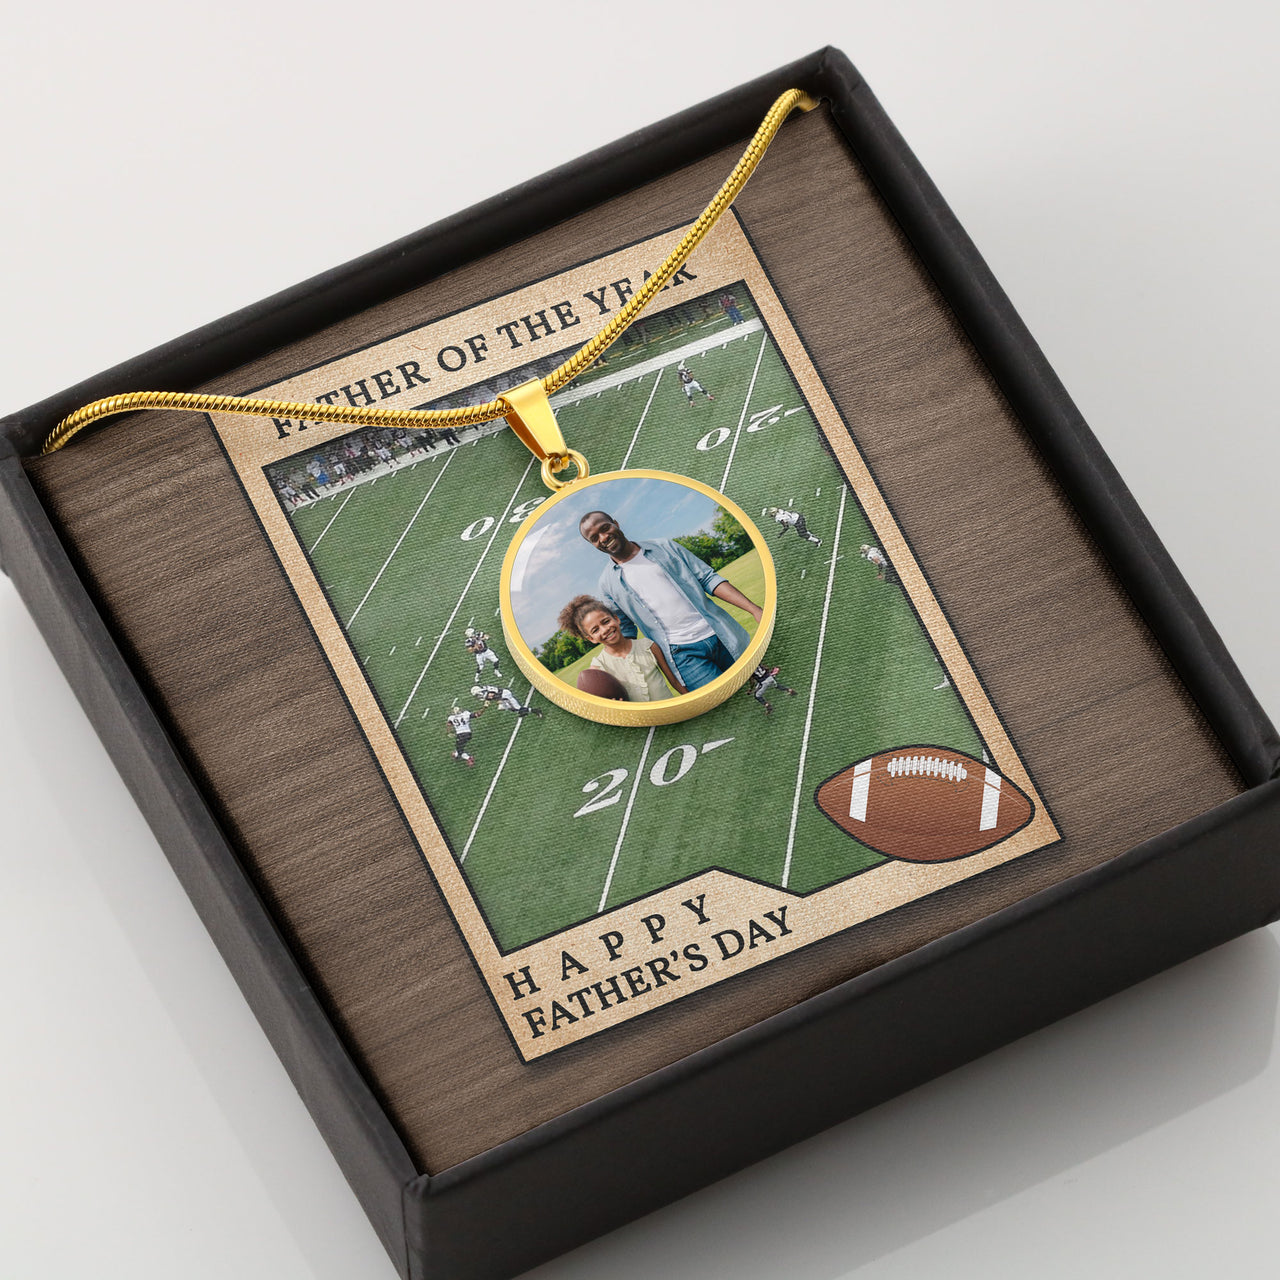 Father's Day Custom Photo Football Necklace, Personalized Fathers Day Gifts for Dad, Father of the Year